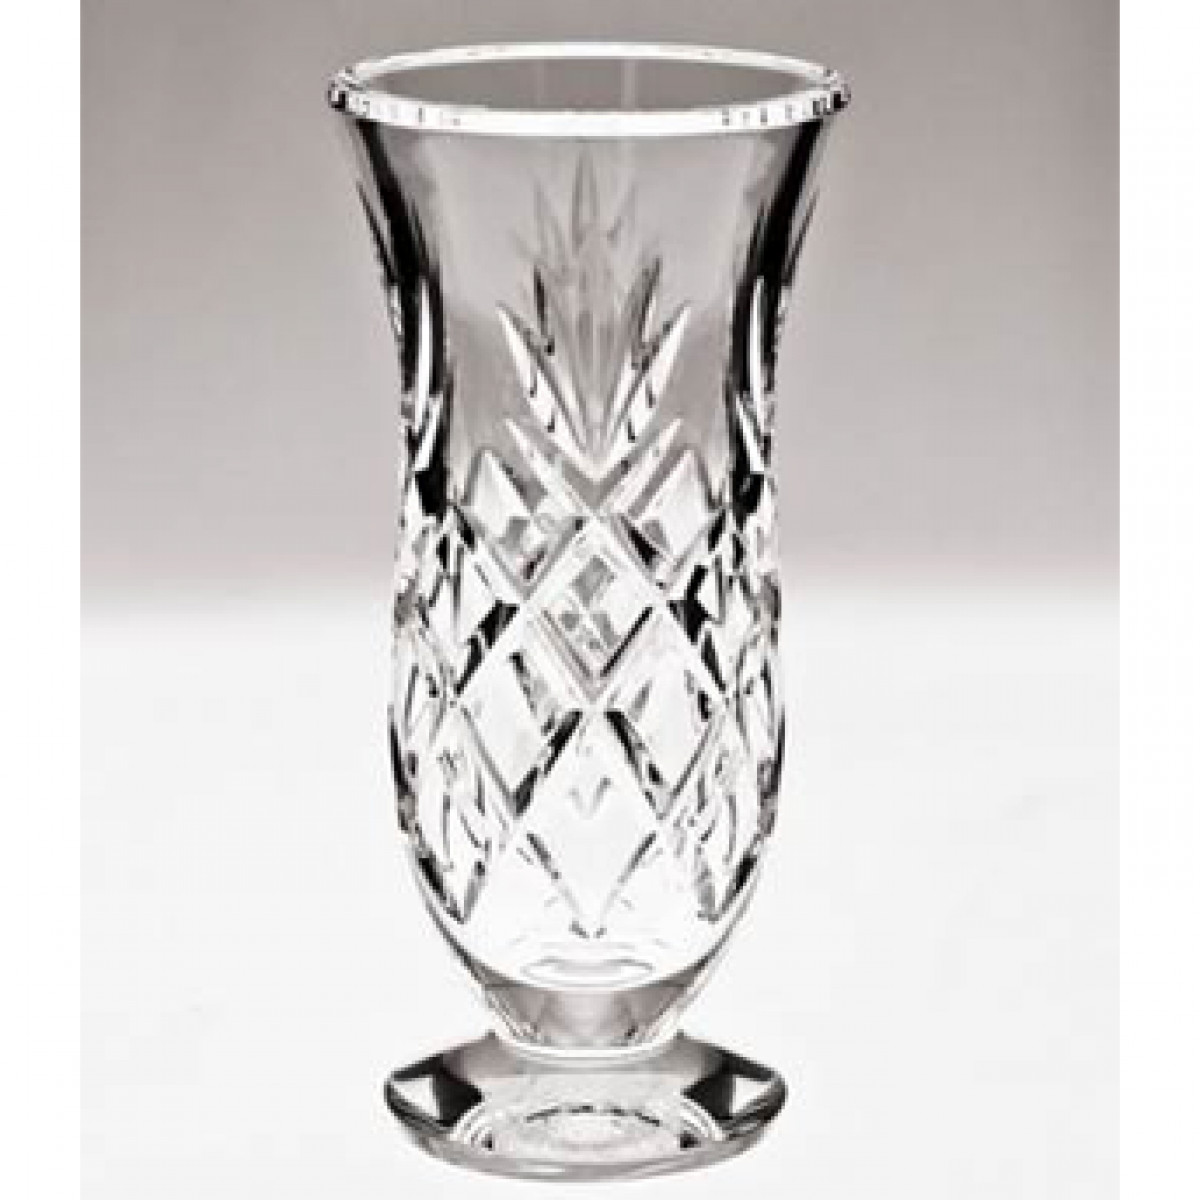 13 Lovable Waterford Marquis Markham Vase 2024 free download waterford marquis markham vase of woodmont 8in vase discontinued waterford us throughout woodmont 8in vase discontinued